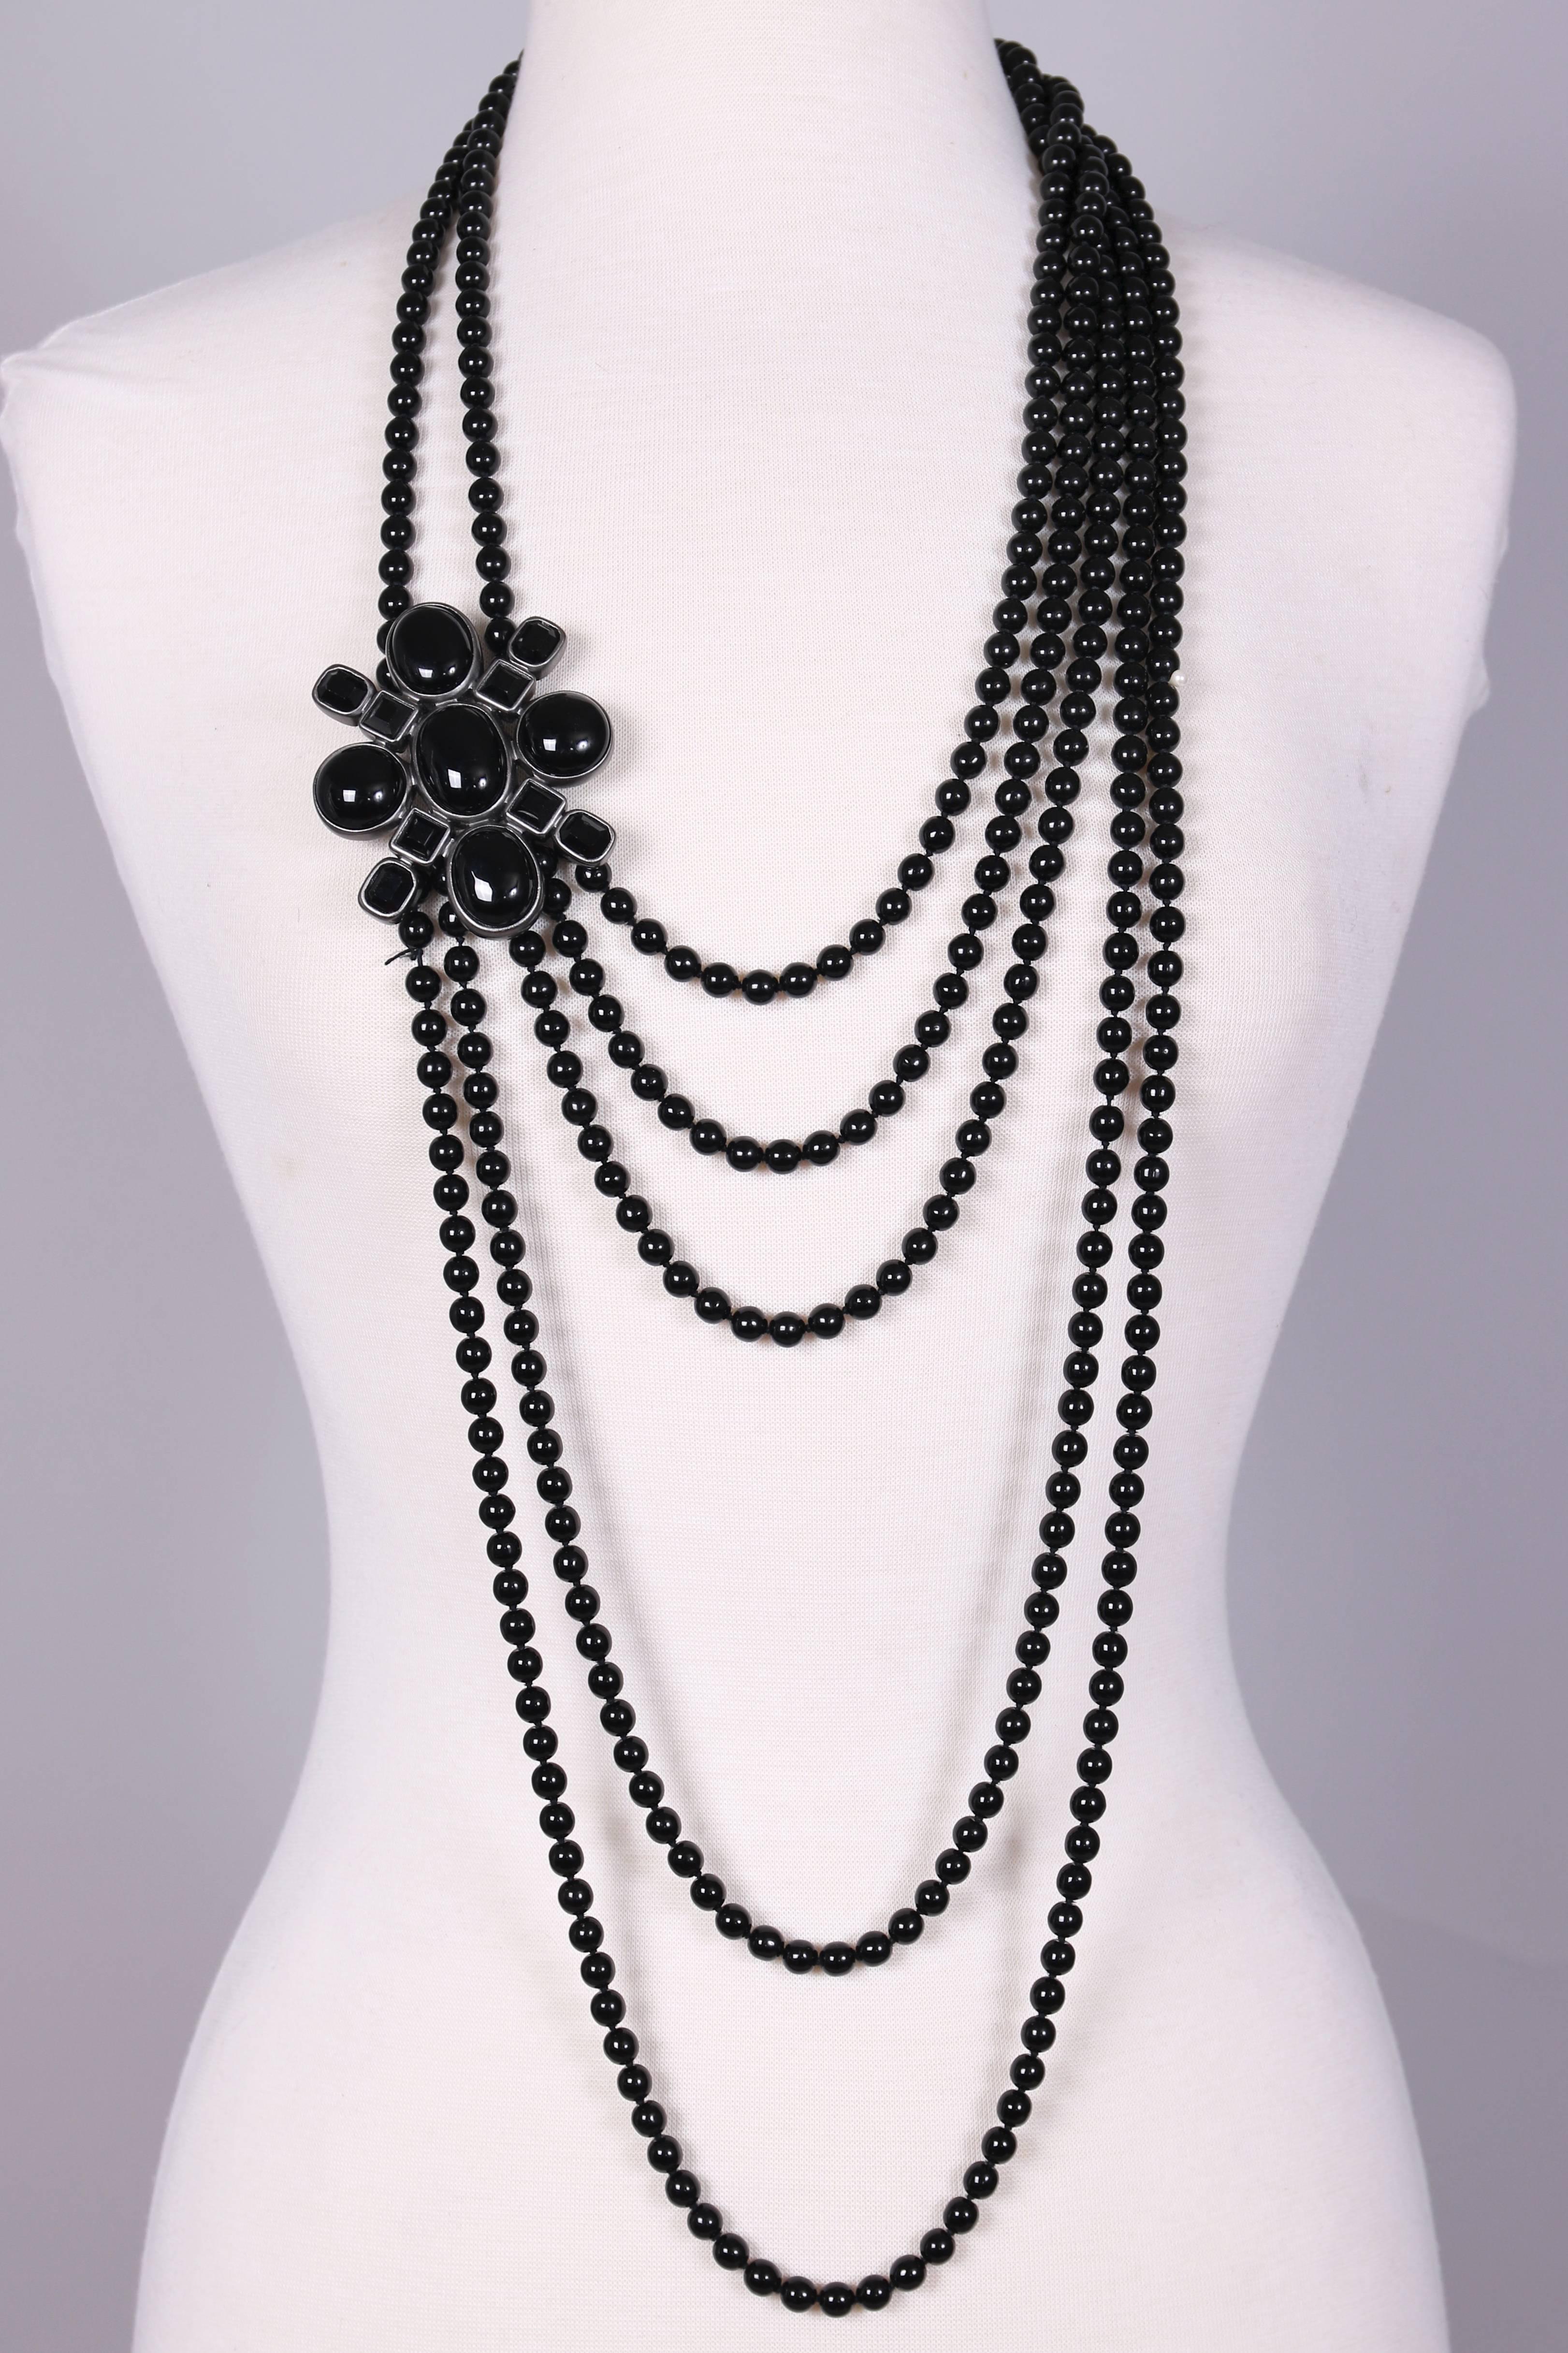 2005 Chanel multi-strand black Patte De Verre bead sautoir necklace attached to broach set w/ Patte De Verre cabochon and faceted beads. Cartouche on back with stamped 